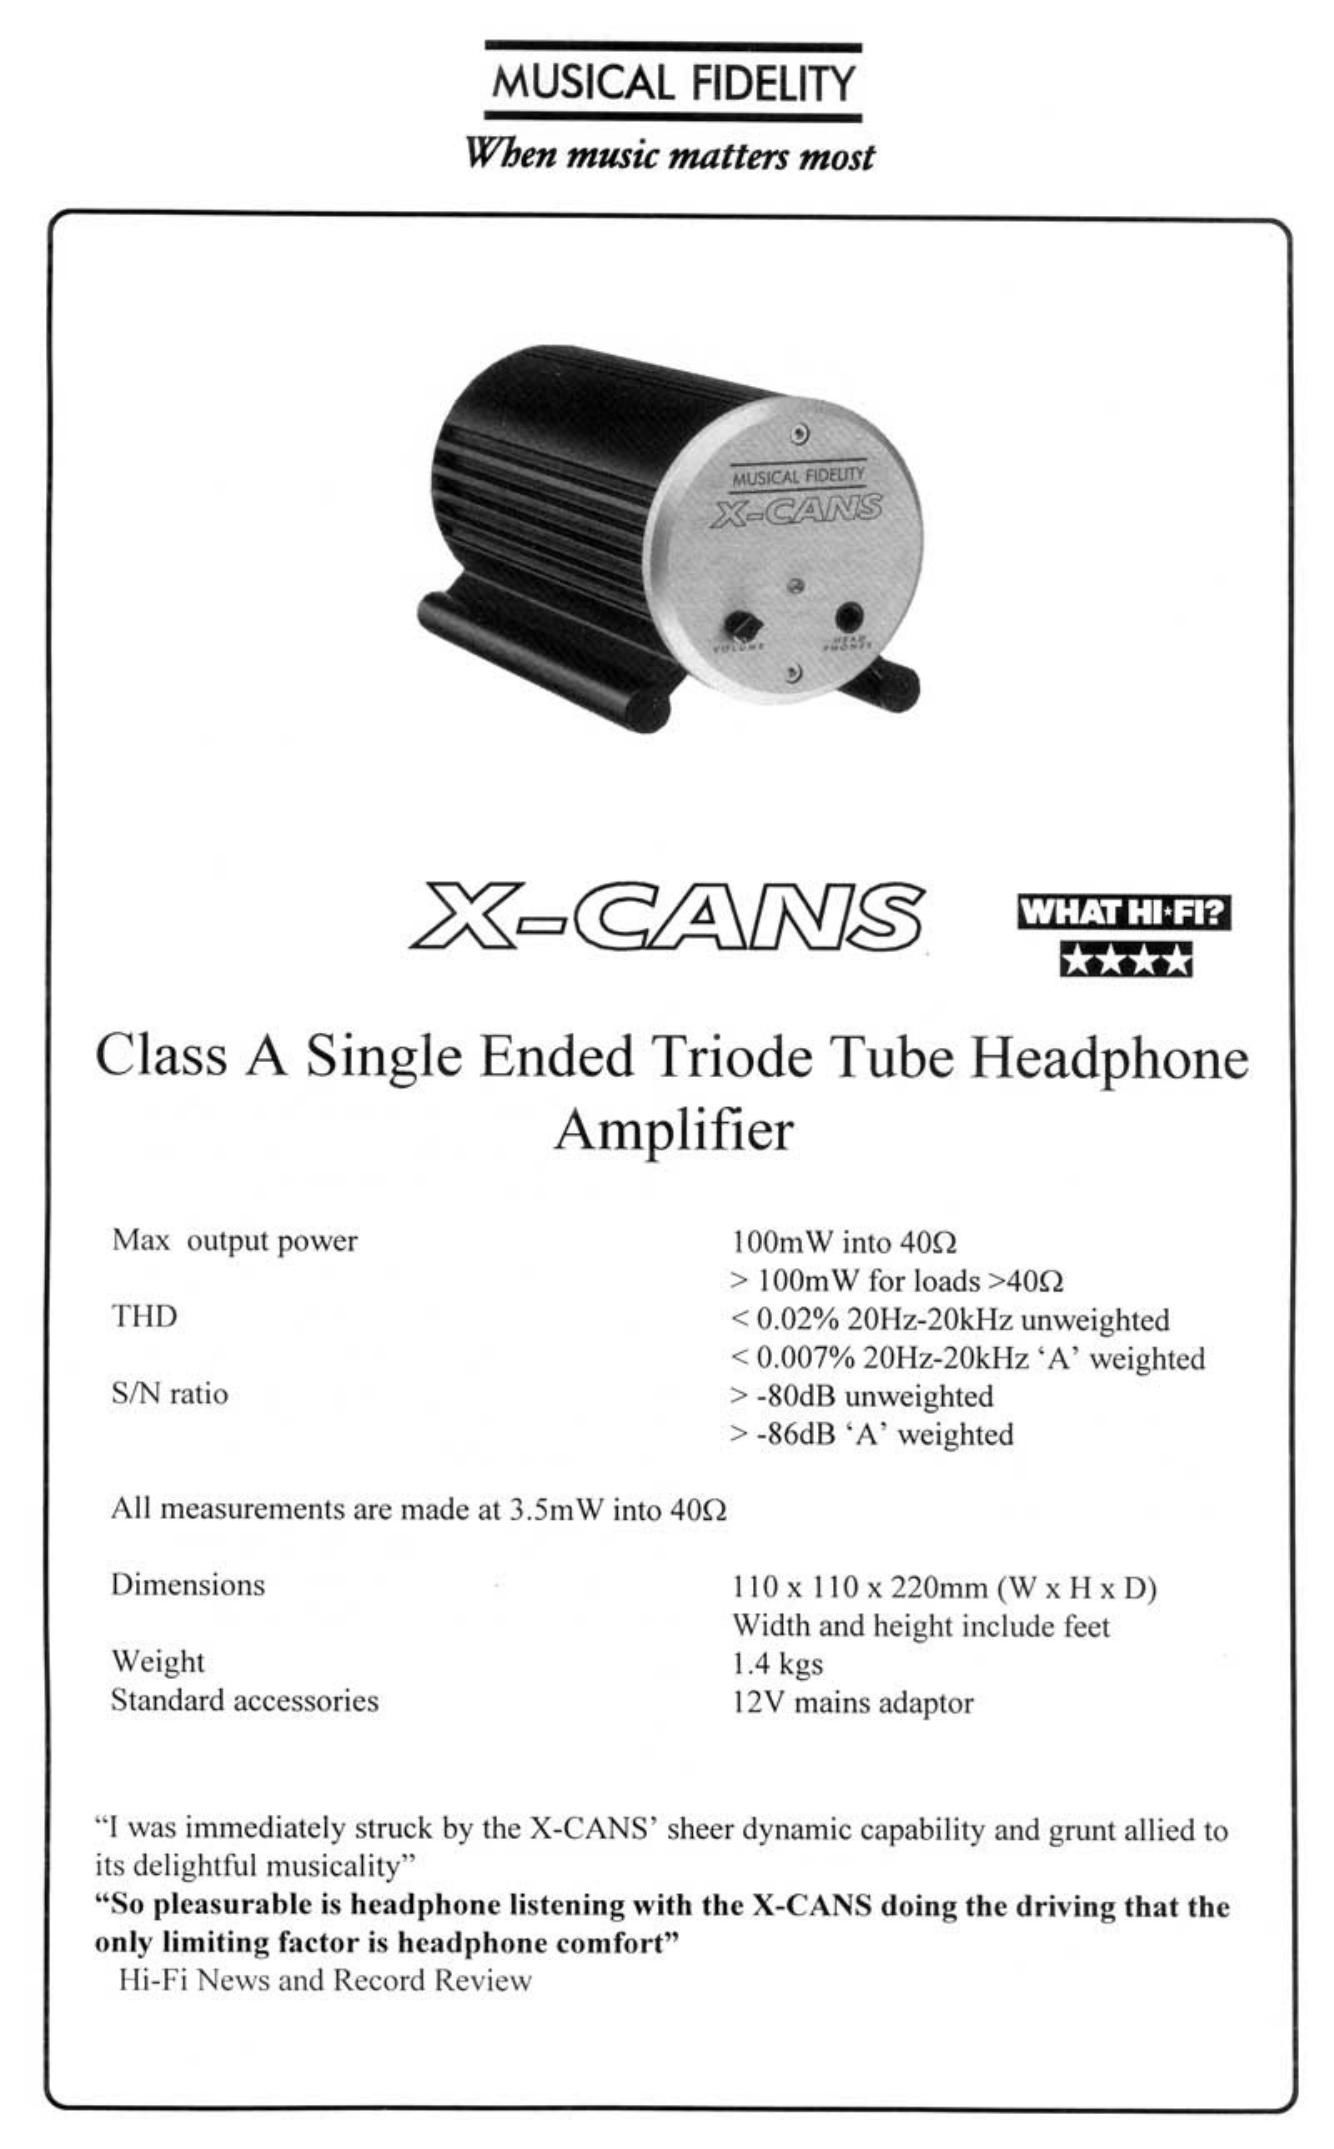 musical fidelity xcans brochure